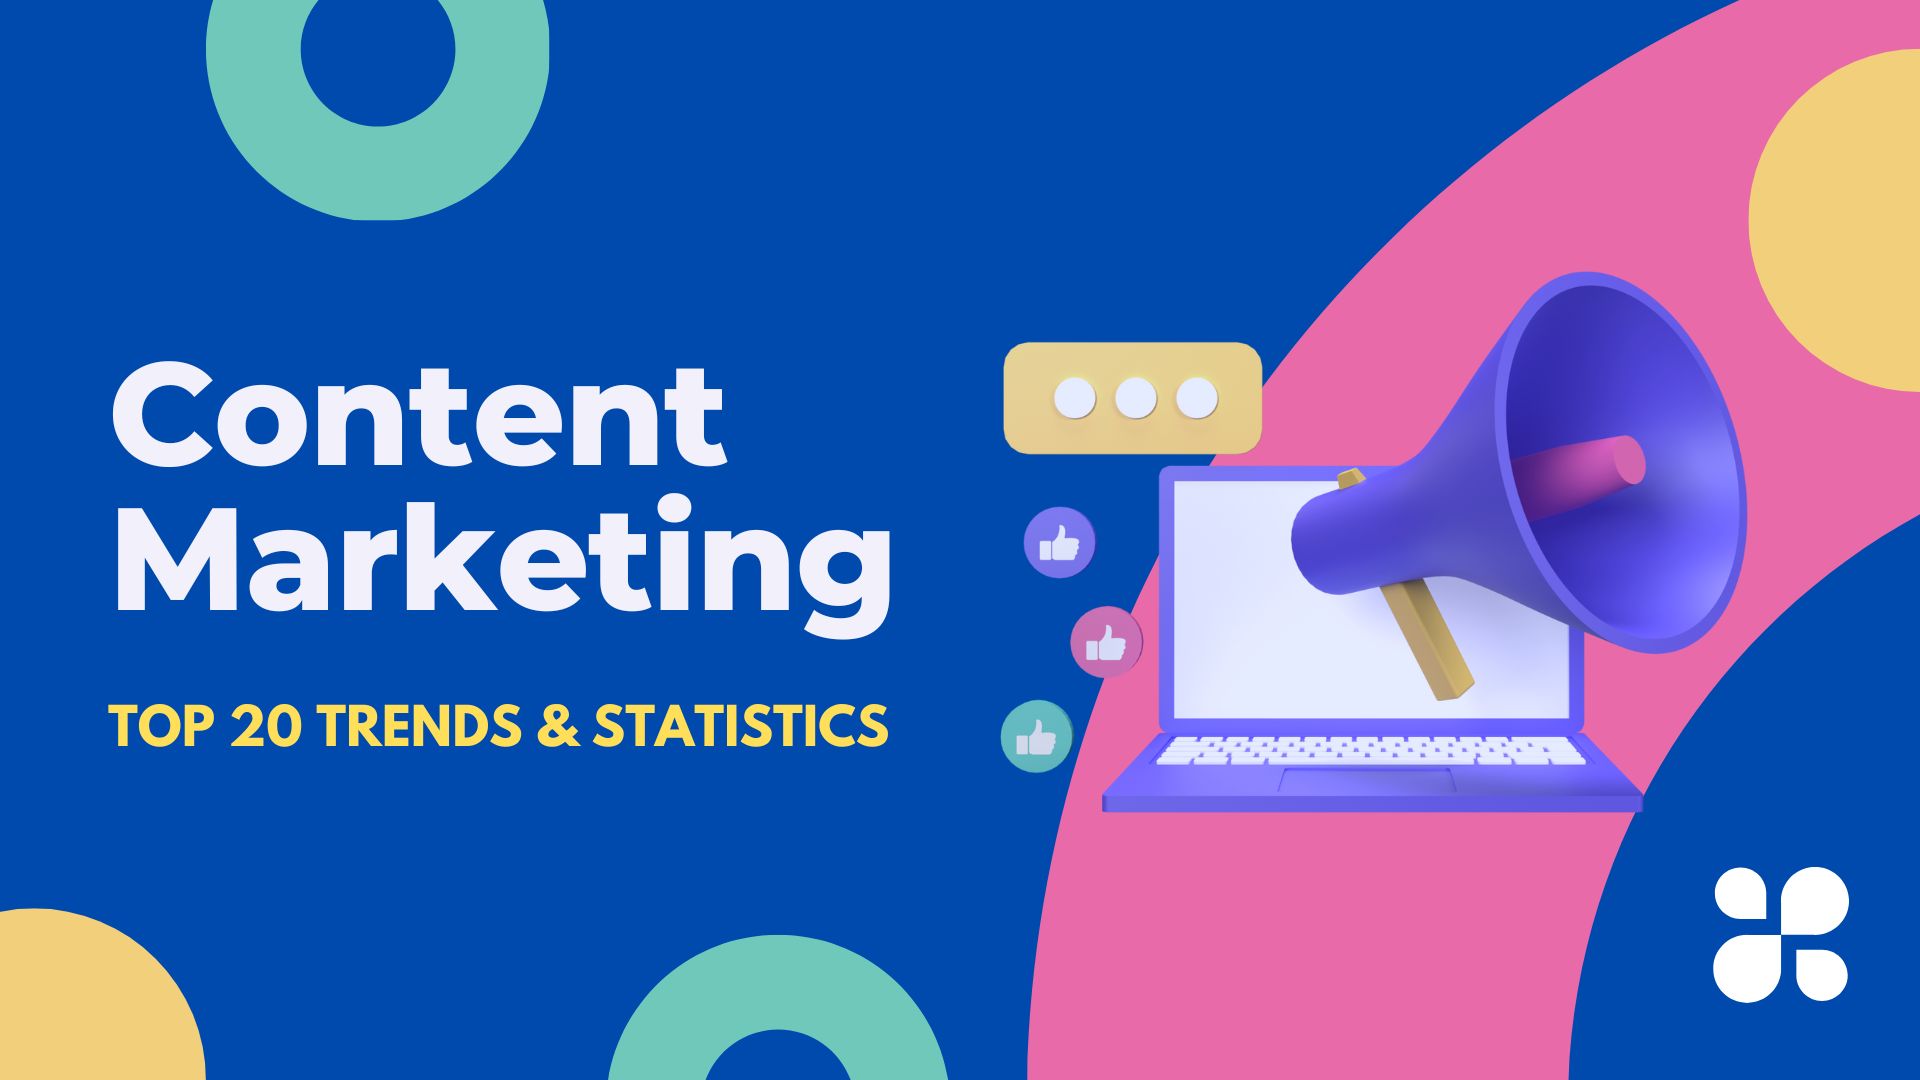 Top 20 Content Marketing Trends & Statistics for 2023